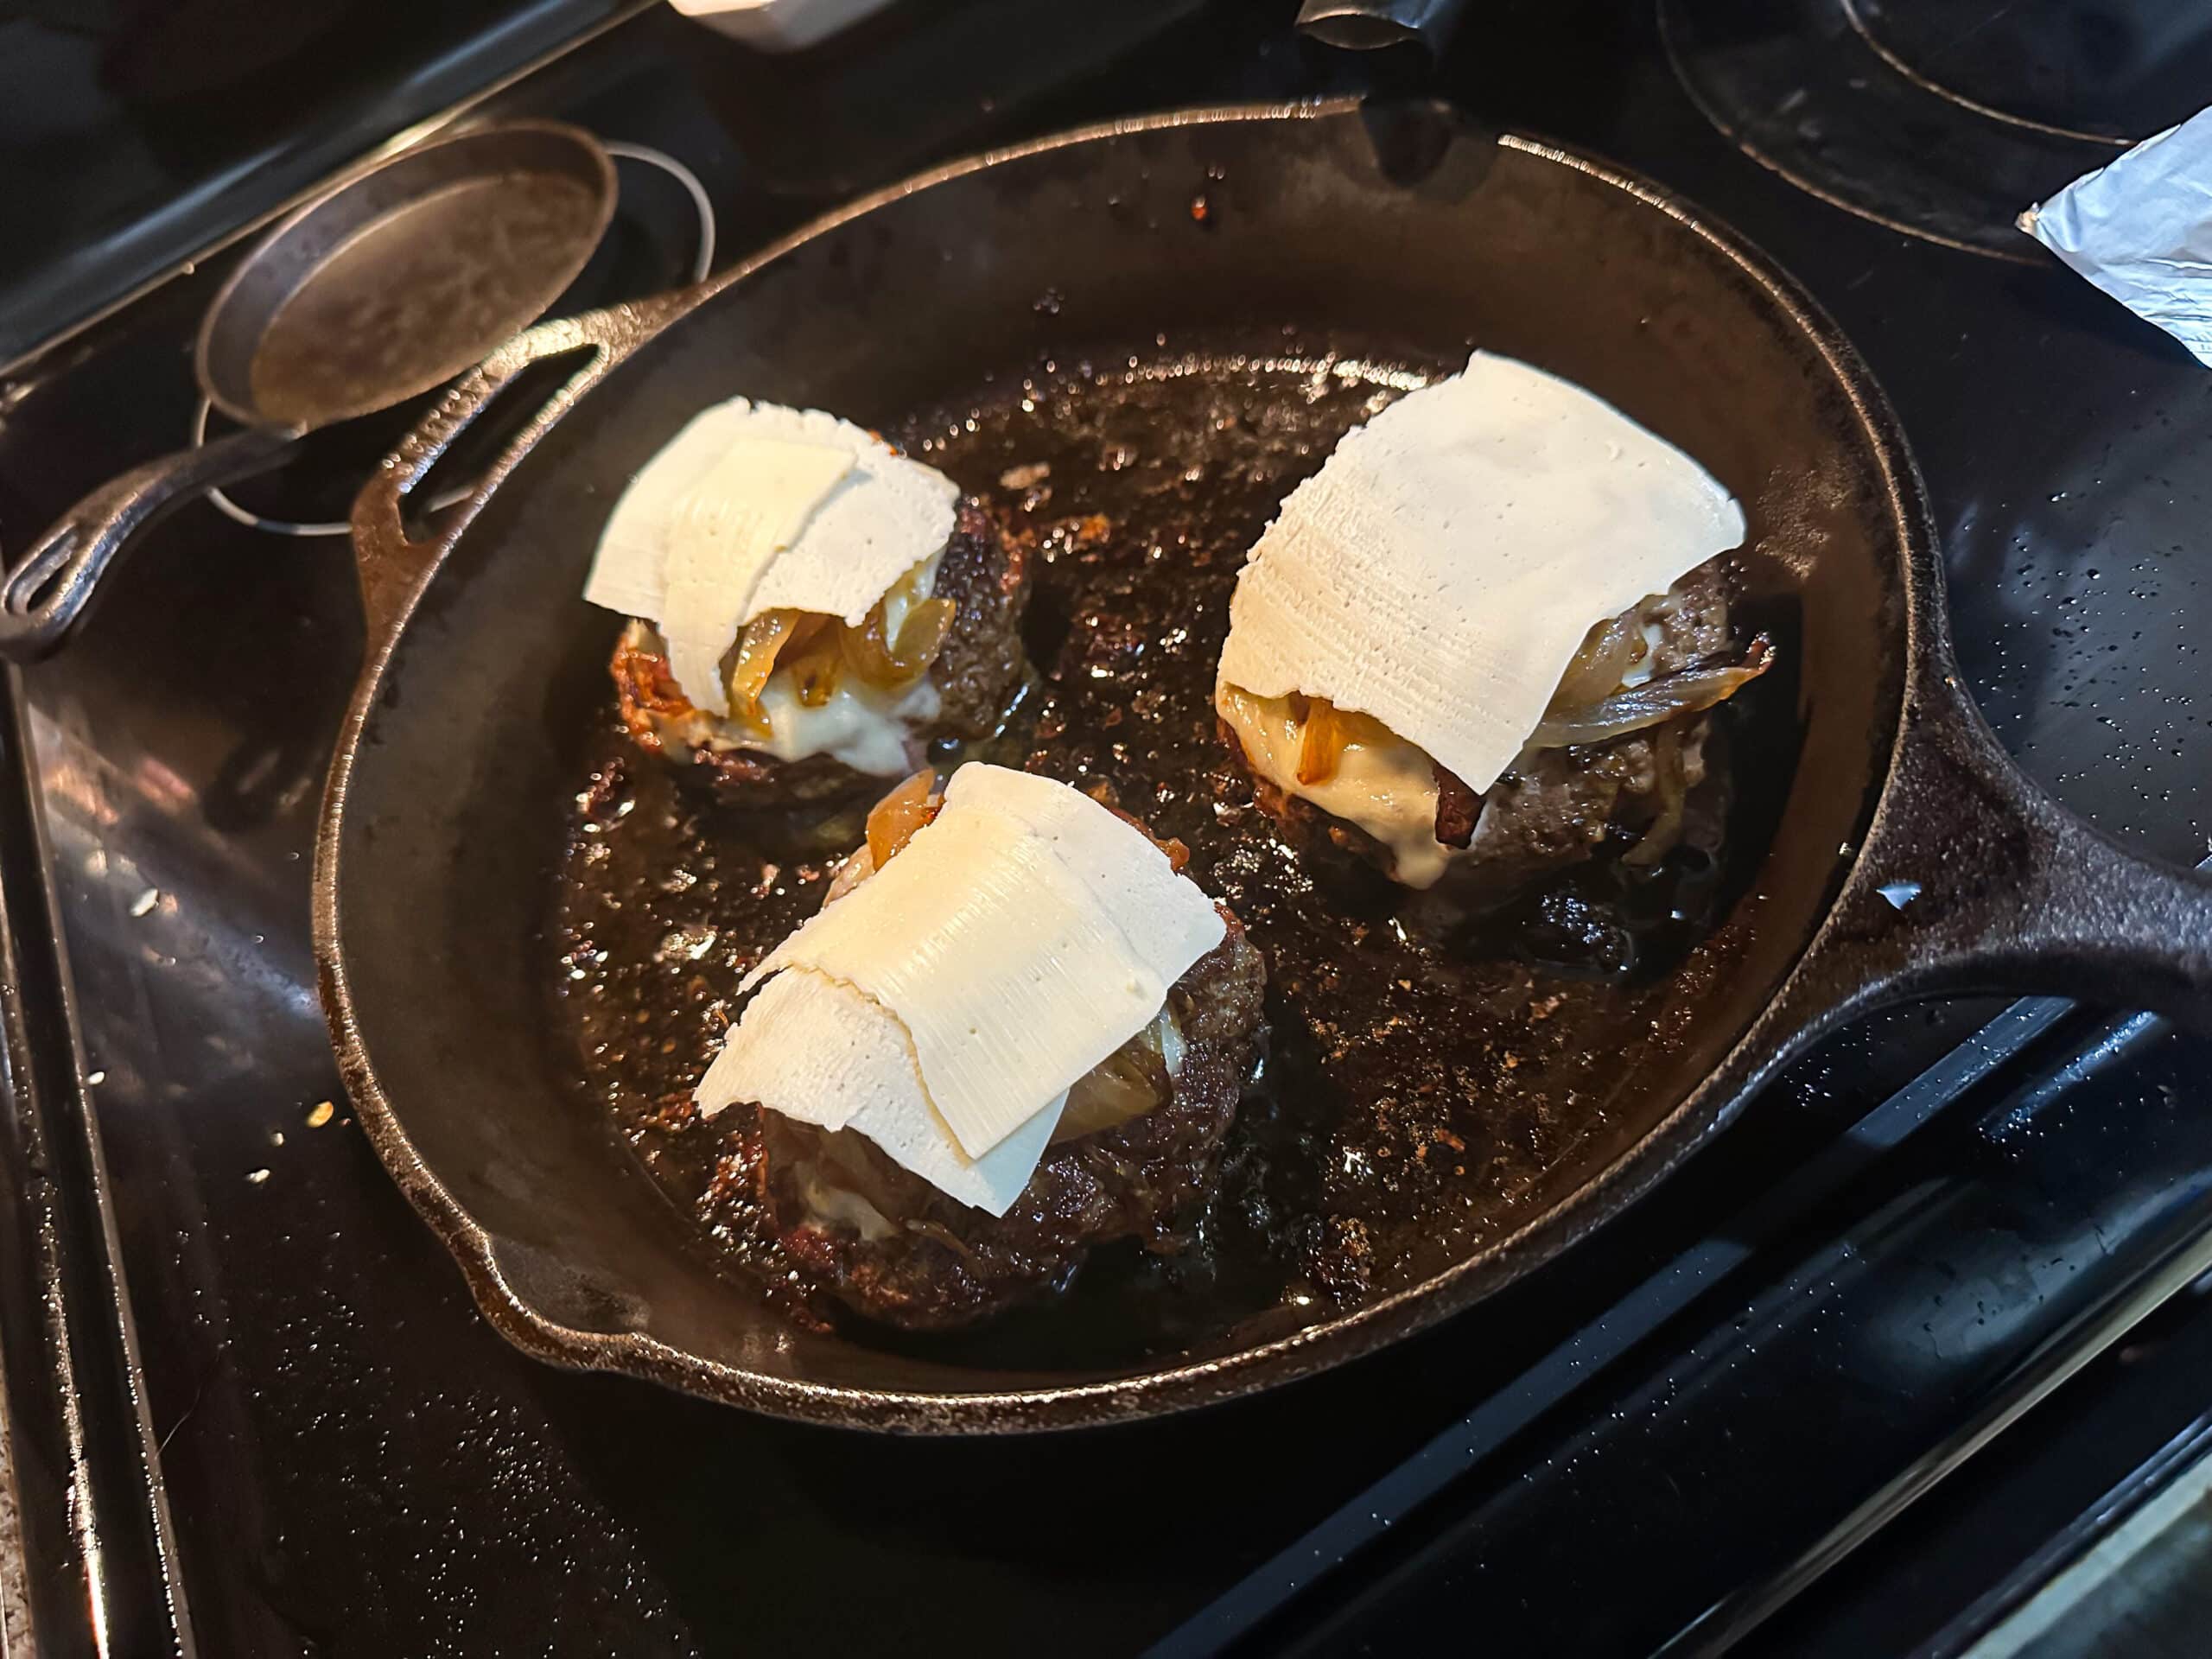 Butter Burgers with caramelized onions and cheese